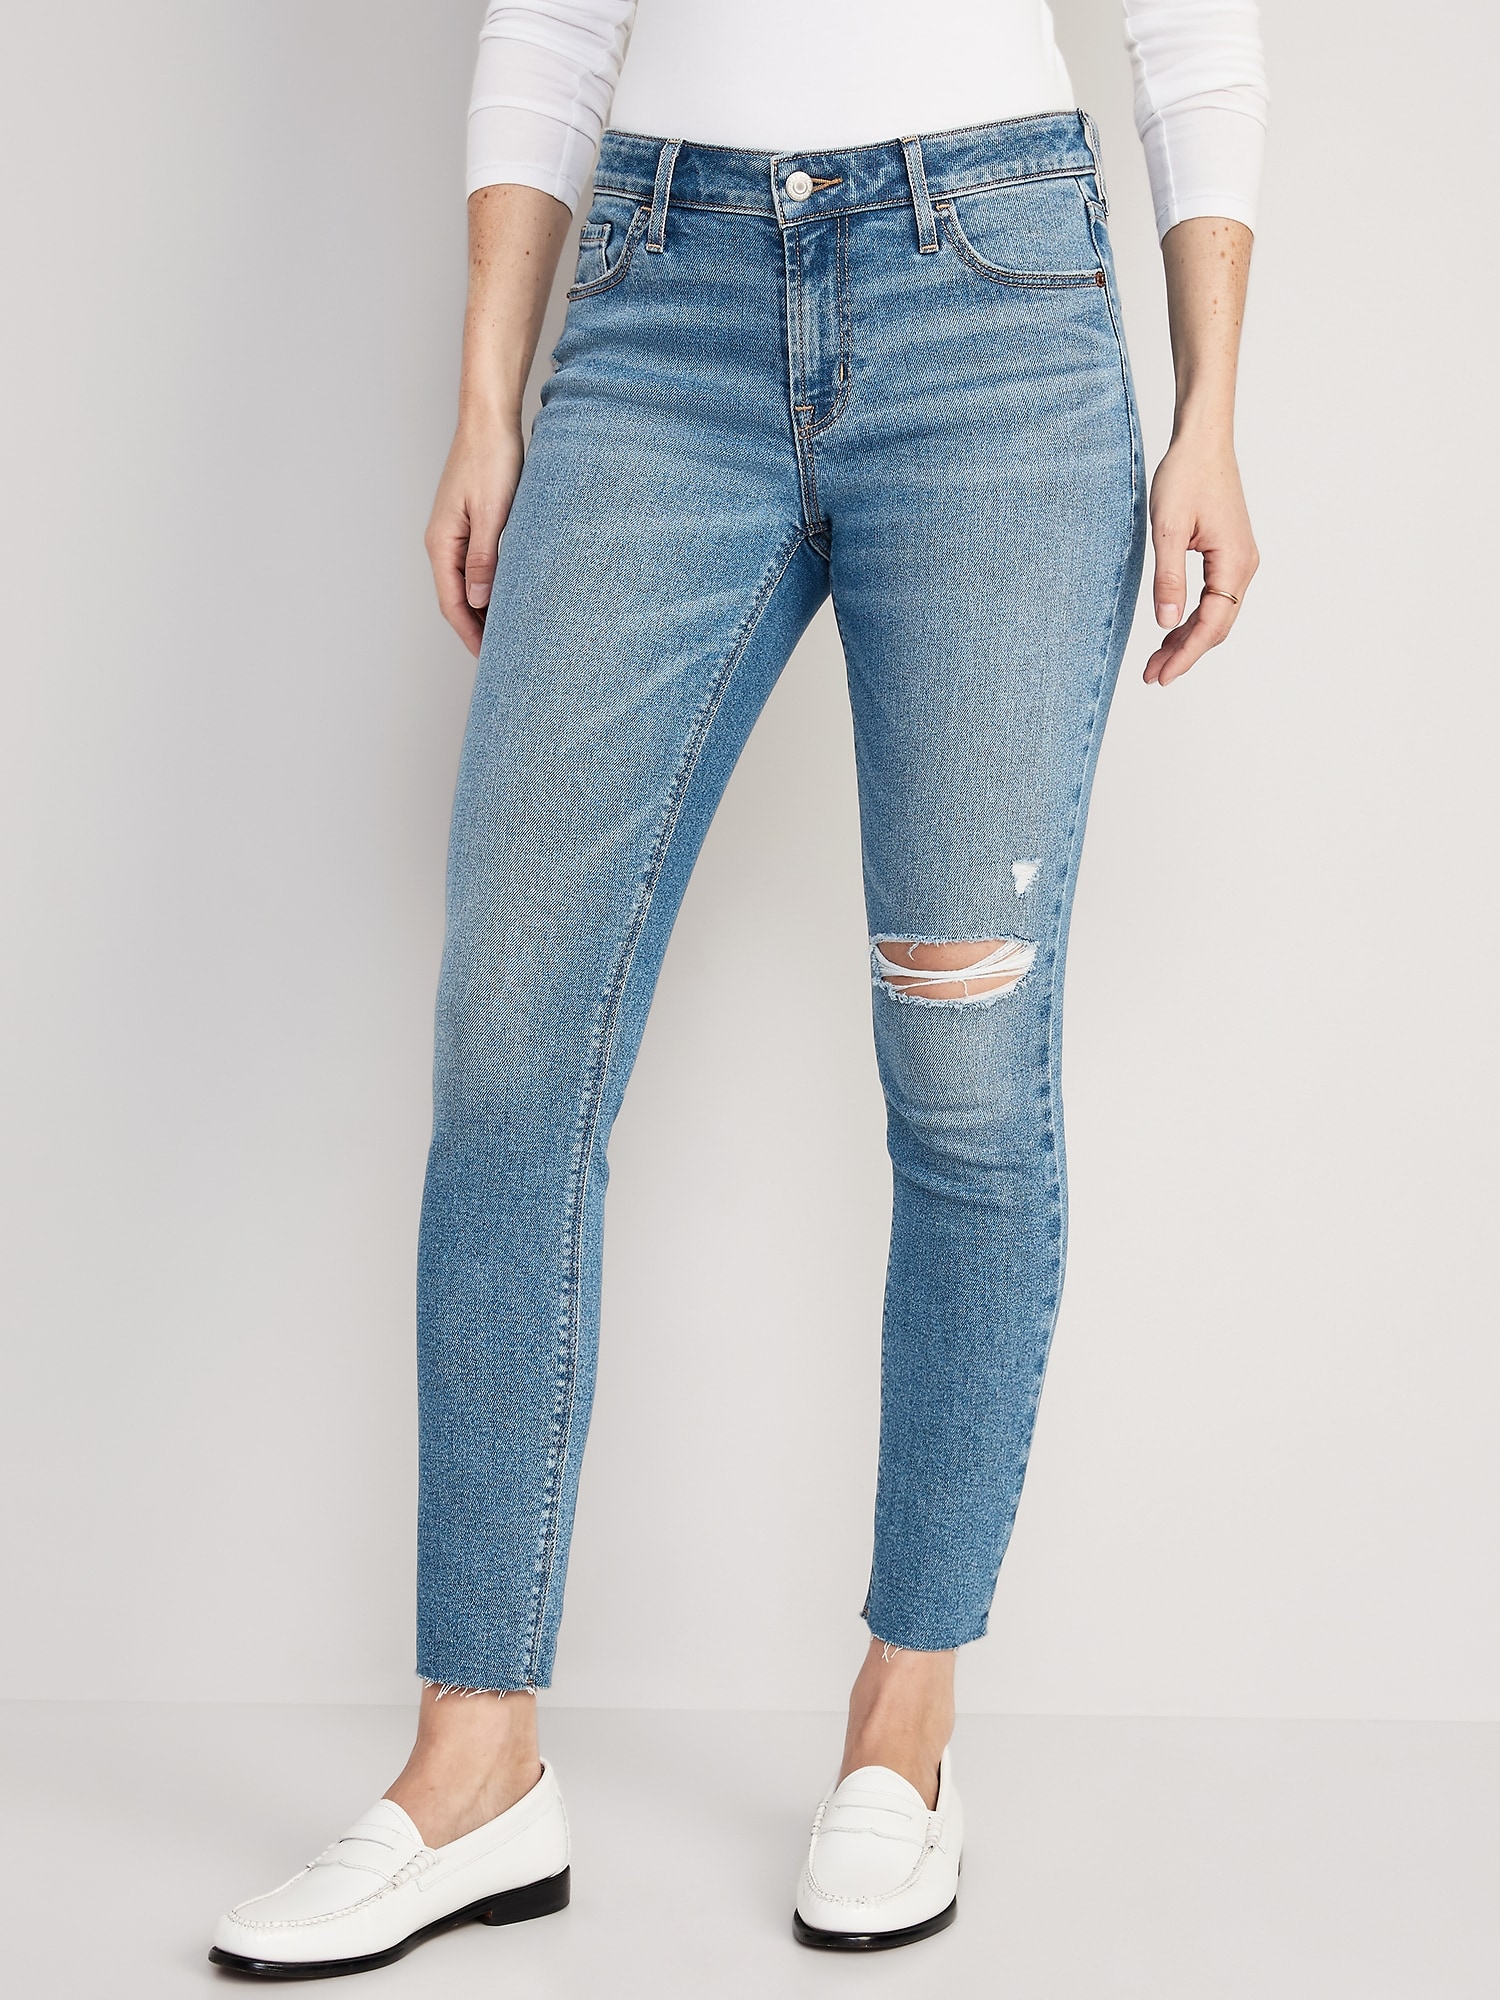 Chic Women's Jeans | Old Navy